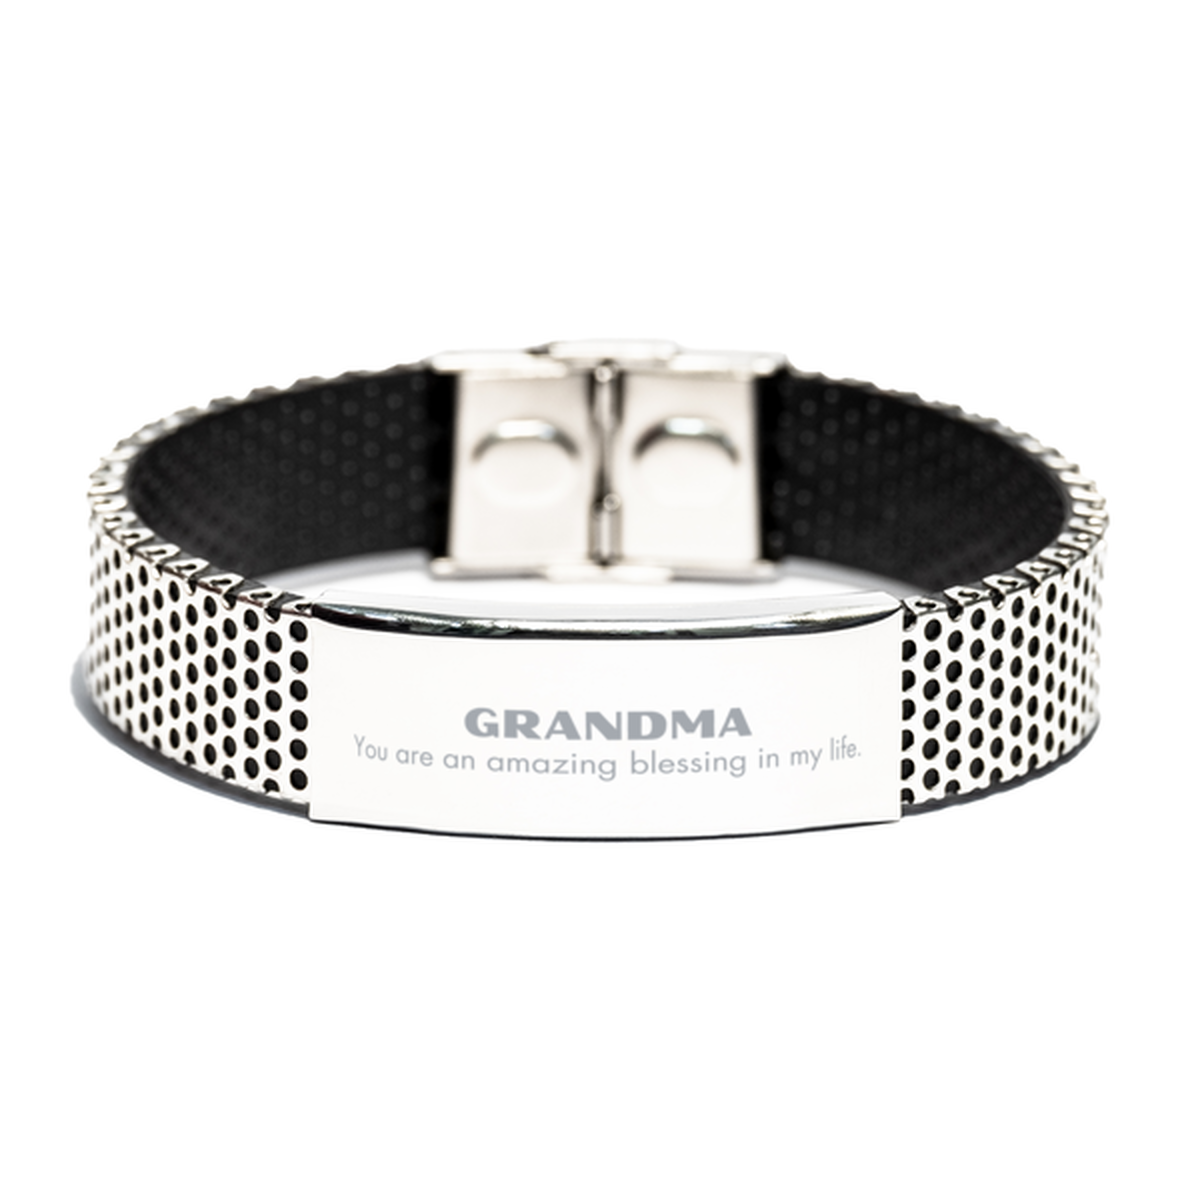 Grandma Stainless Steel Bracelet, You are an amazing blessing in my life, Thank You Gifts For Grandma, Inspirational Birthday Christmas Unique Gifts For Grandma